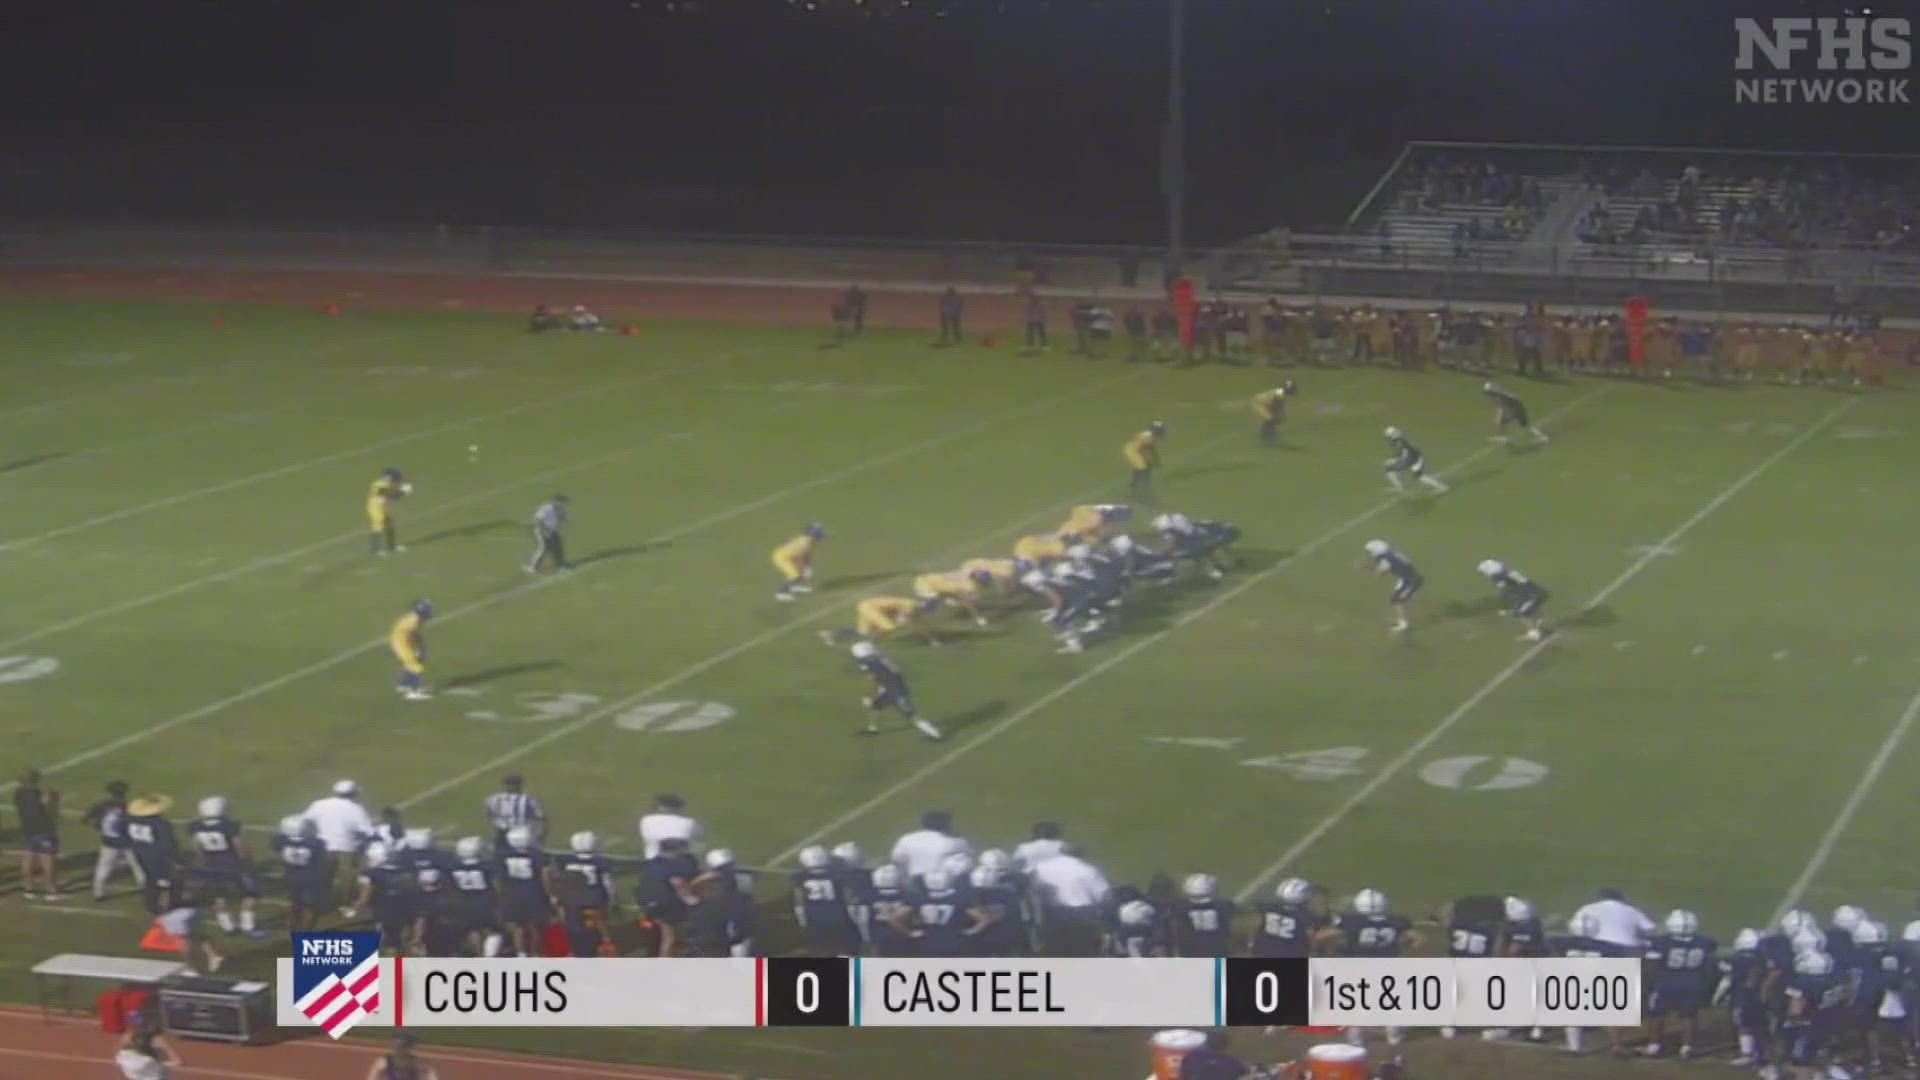 Casteel improved to 4-0 with a win on Friday.